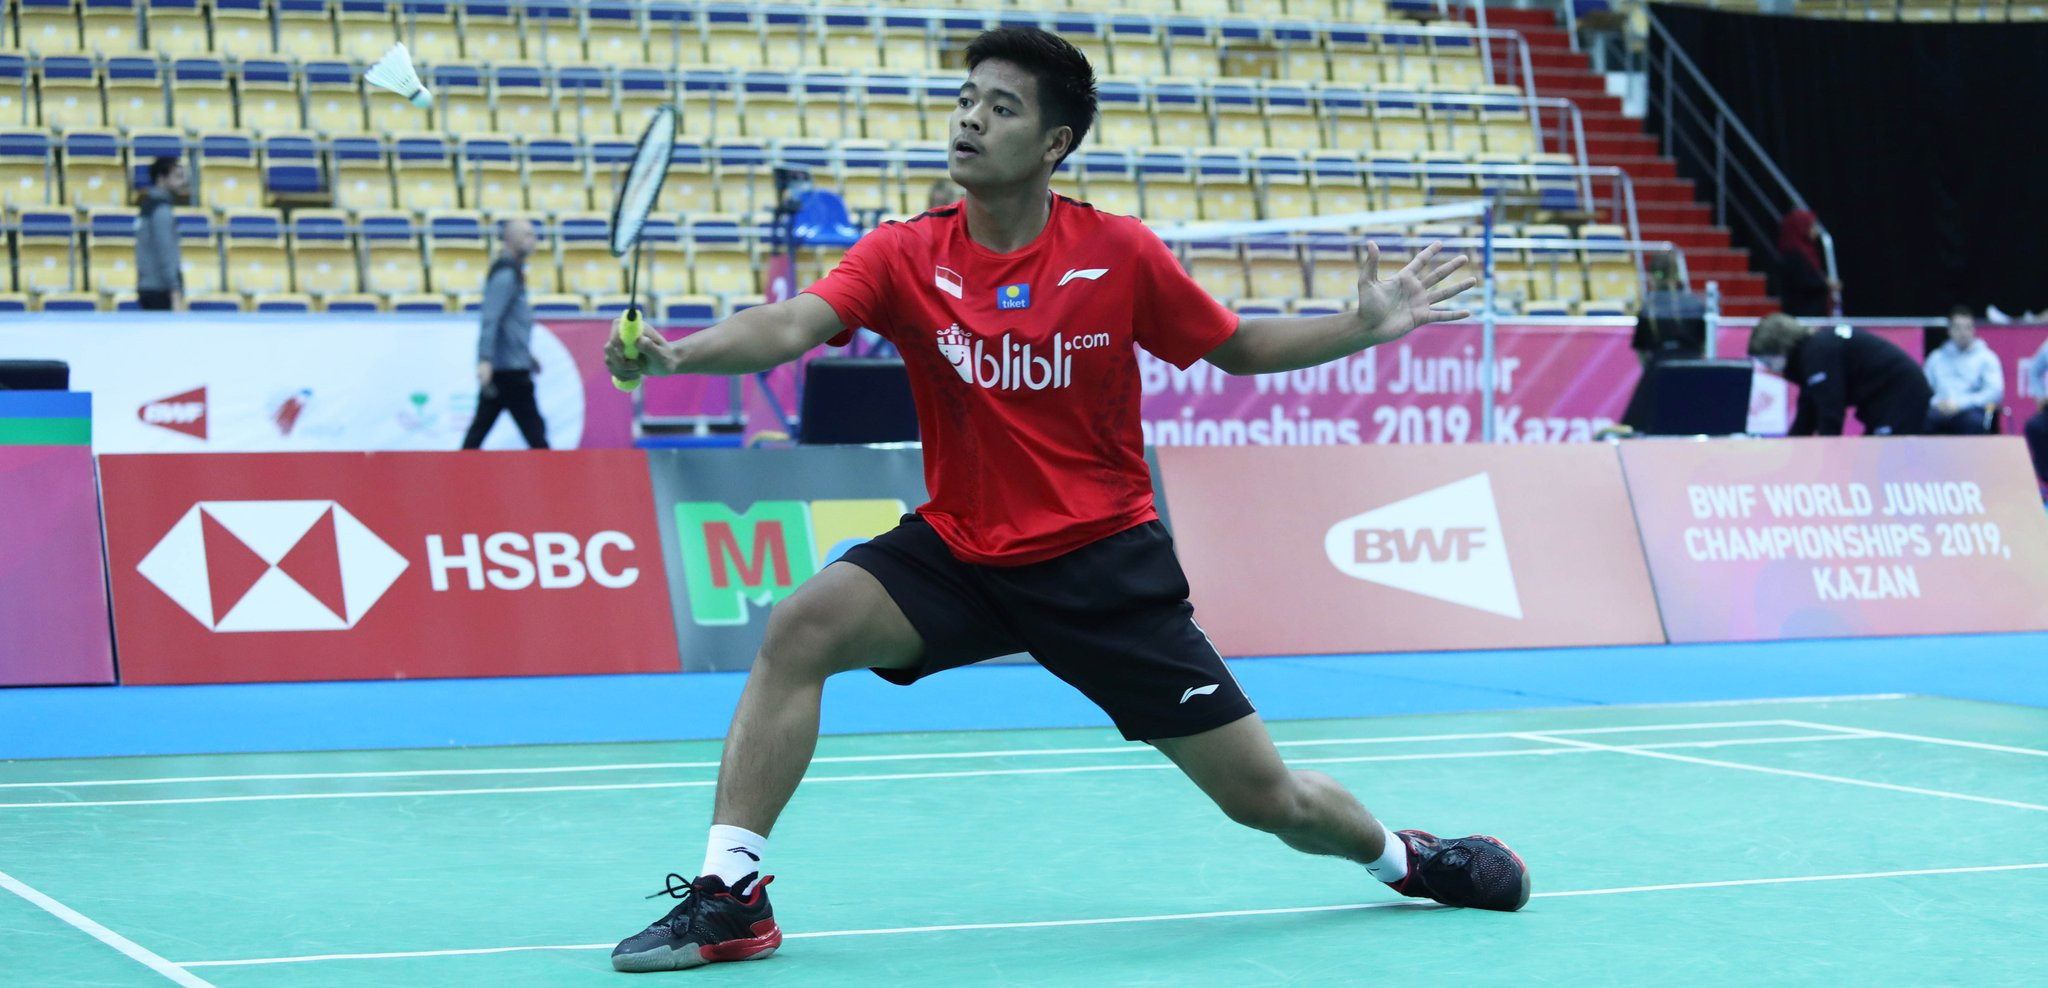 Top seeds Indonesia got off to the perfect start with a crushing 5-0 victory over Uganda ©Twitter